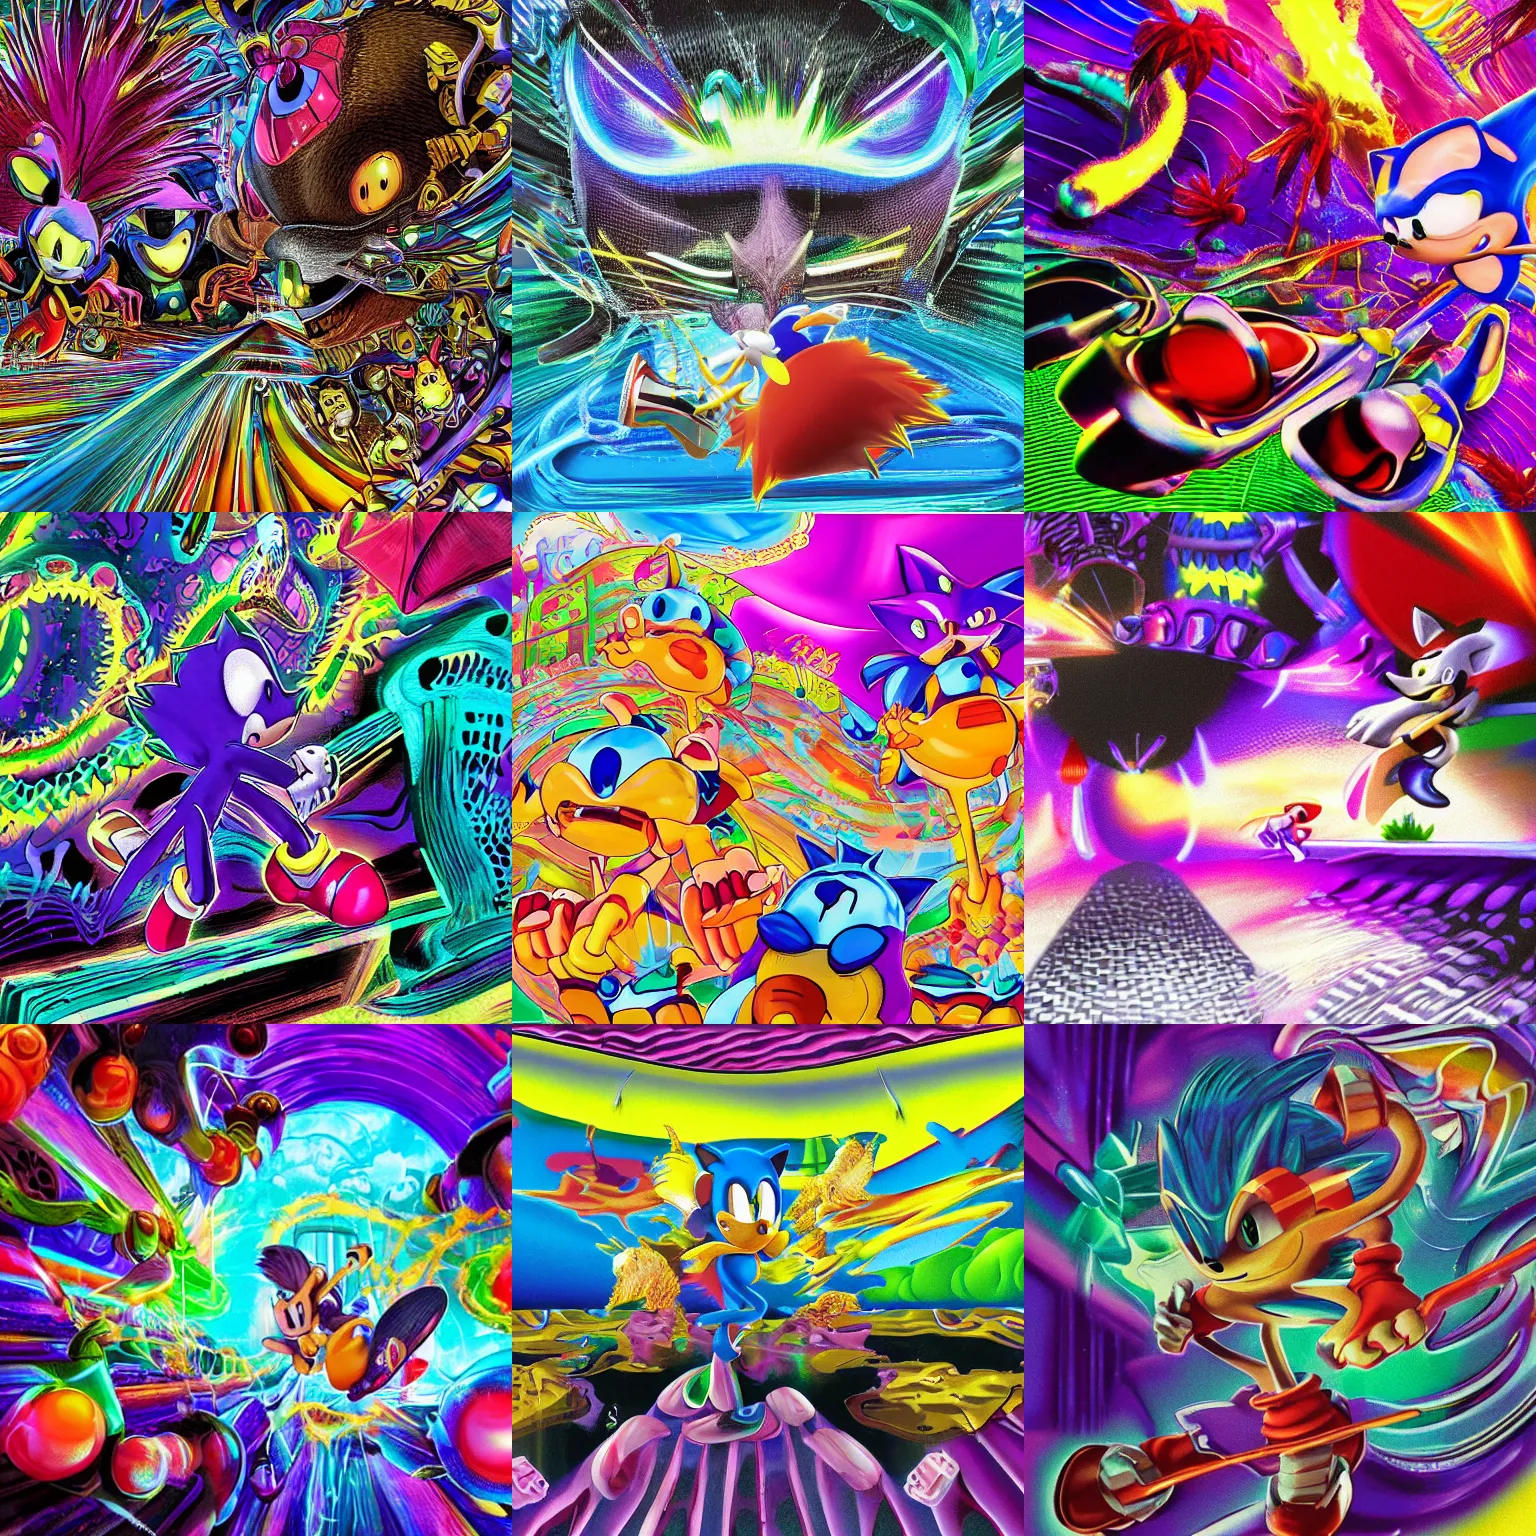 Prompt: sonic closeup of surreal, sharp, detailed professional, high quality airbrush art MGMT album cover of a liquid dissolving LSD DMT sonic the hedgehog surfing through cyberspace, purple checkerboard background, 1990s 1992 Sega Genesis video game album cover